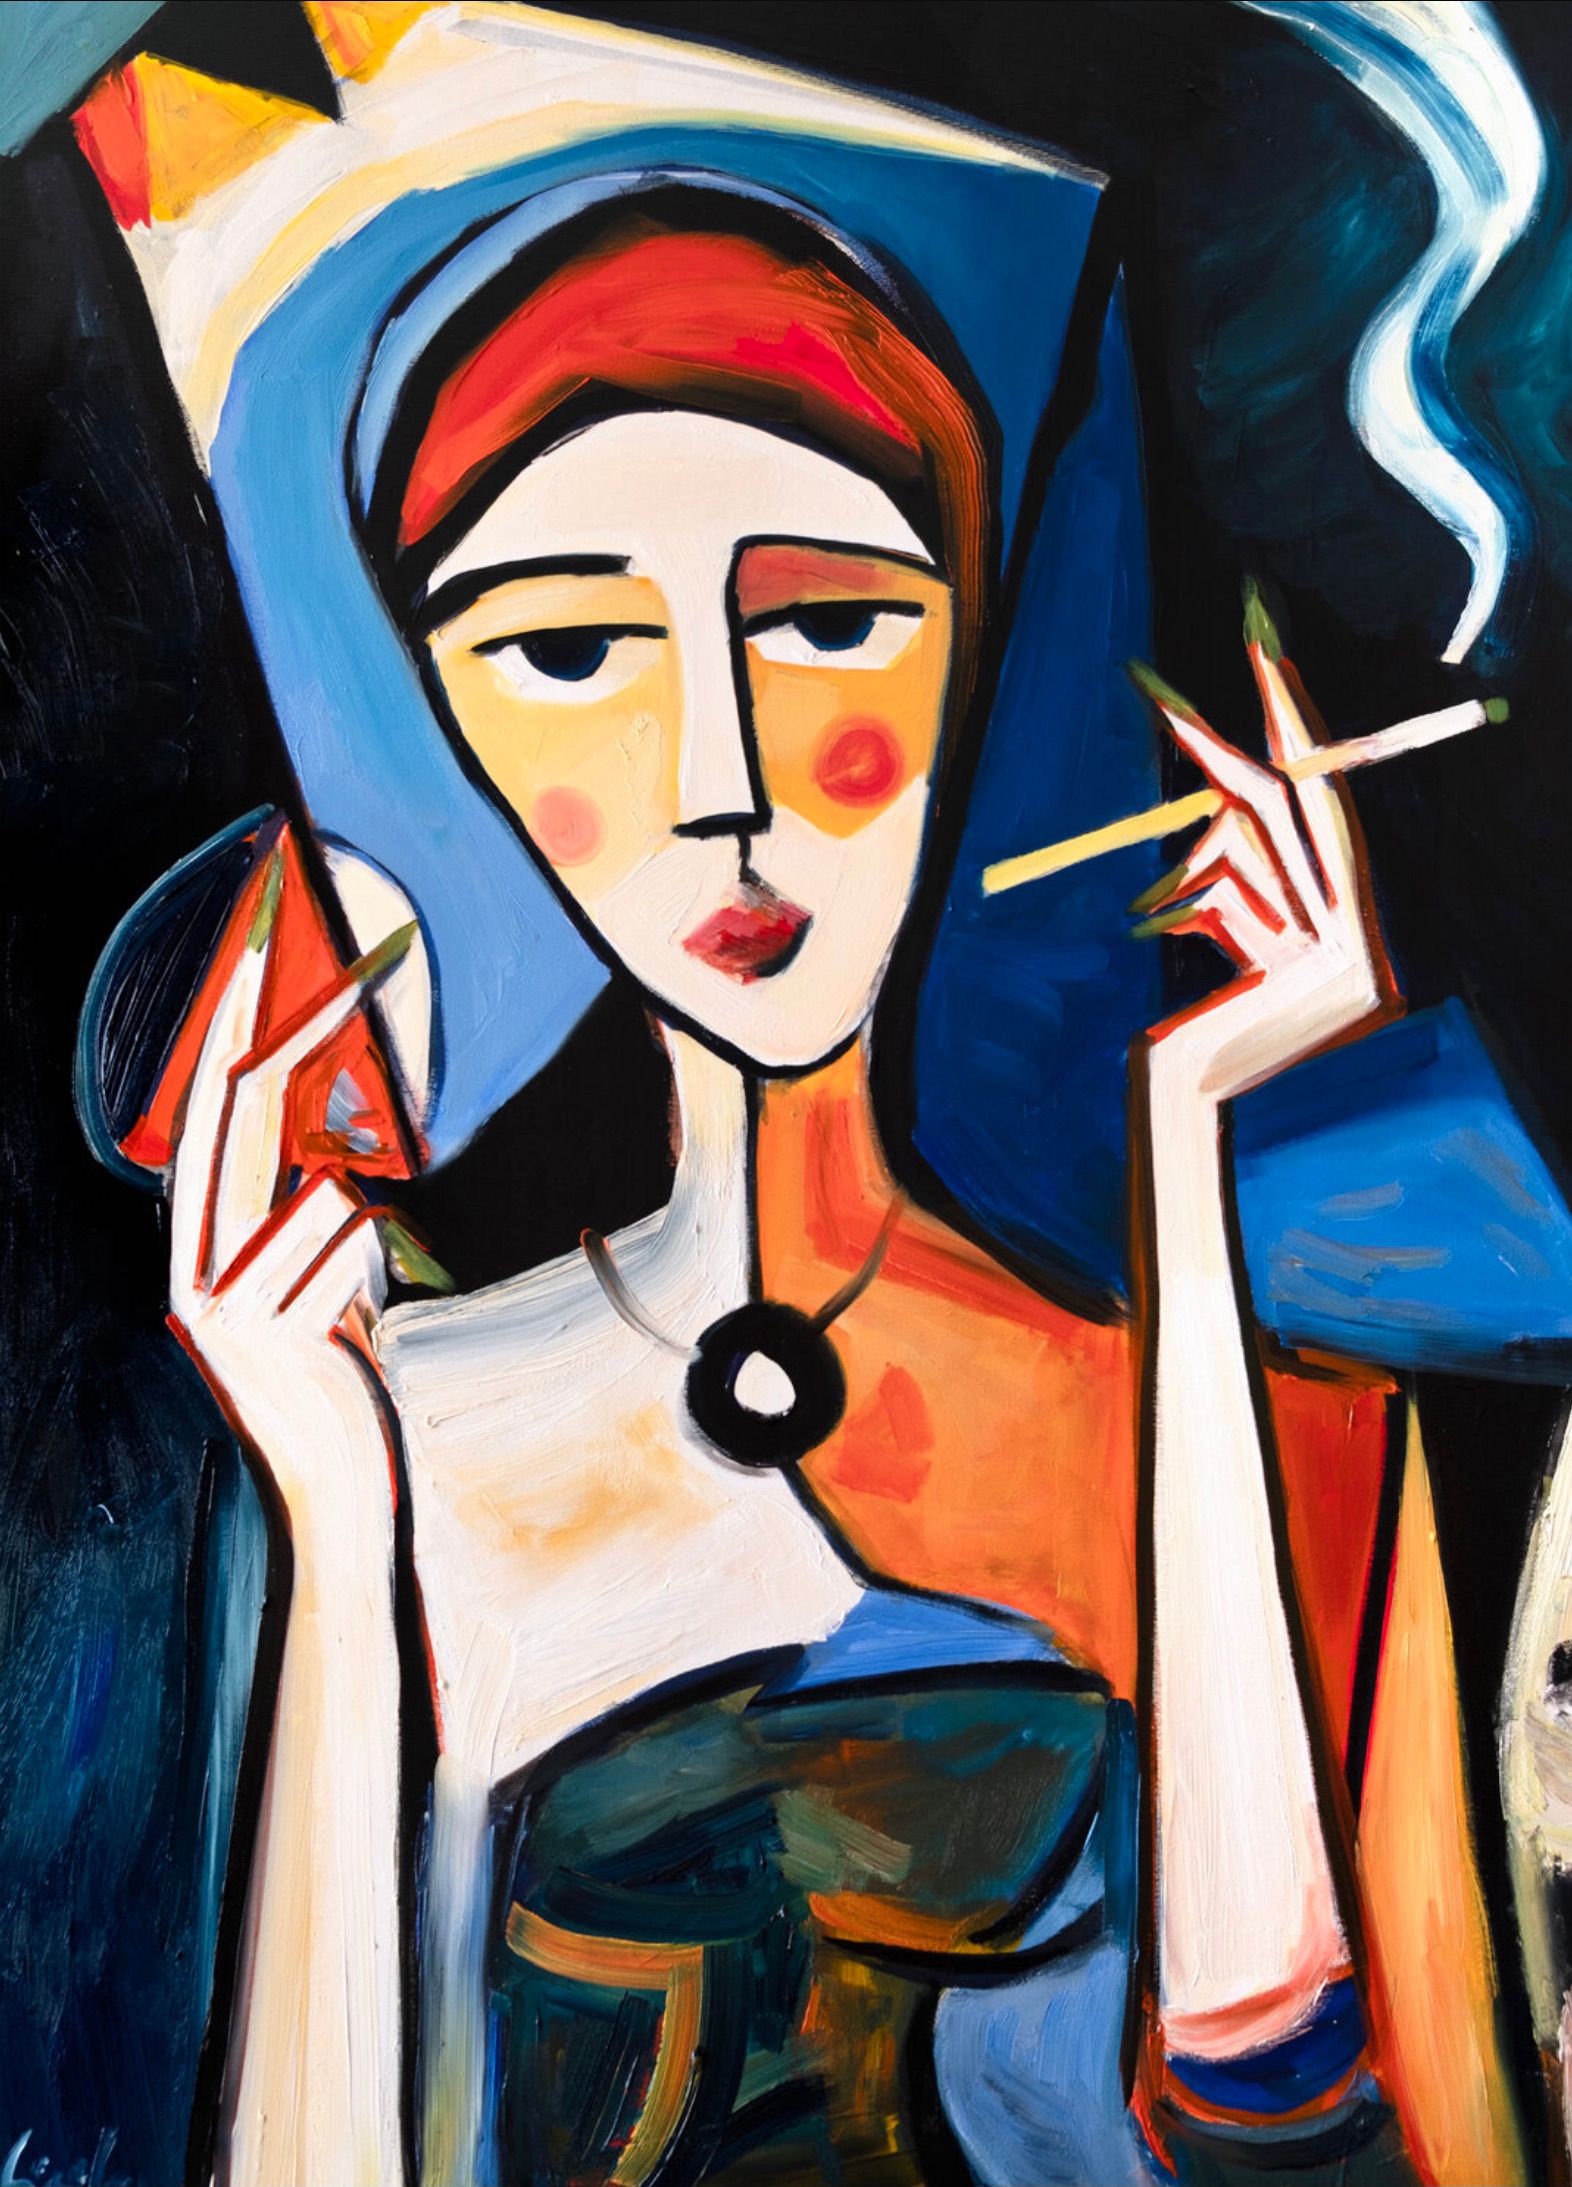 MECESLA Maciej Cieśla, "Girl in semi-abstract style 10", Woman with cigarette, Warm but nostalgic, melancholic composition with an abstract gesture dominated by white and blue with red accents.